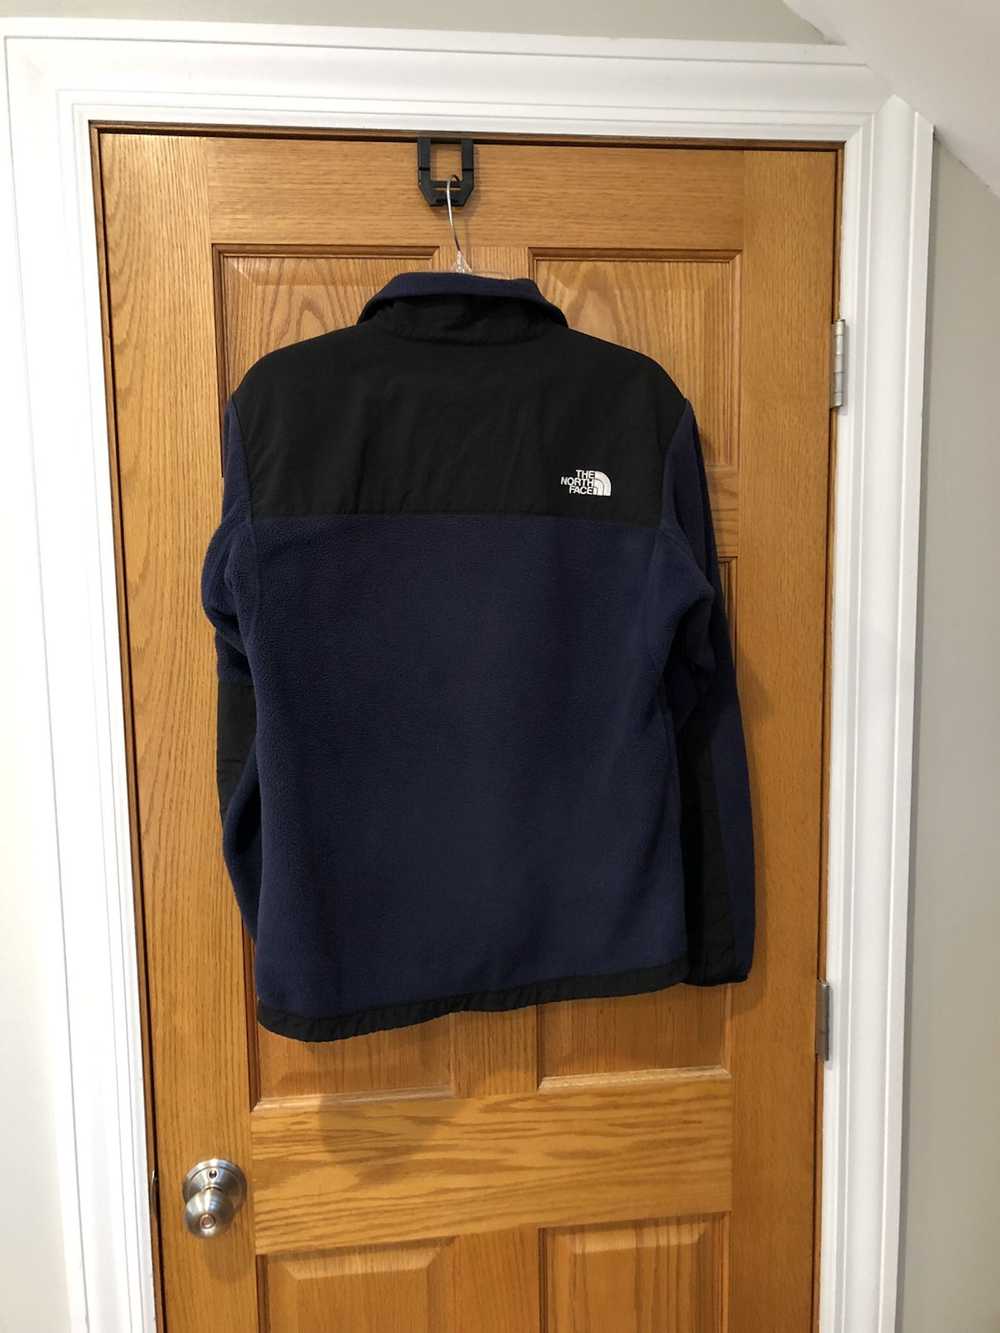 The North Face North Face Fleece - image 4